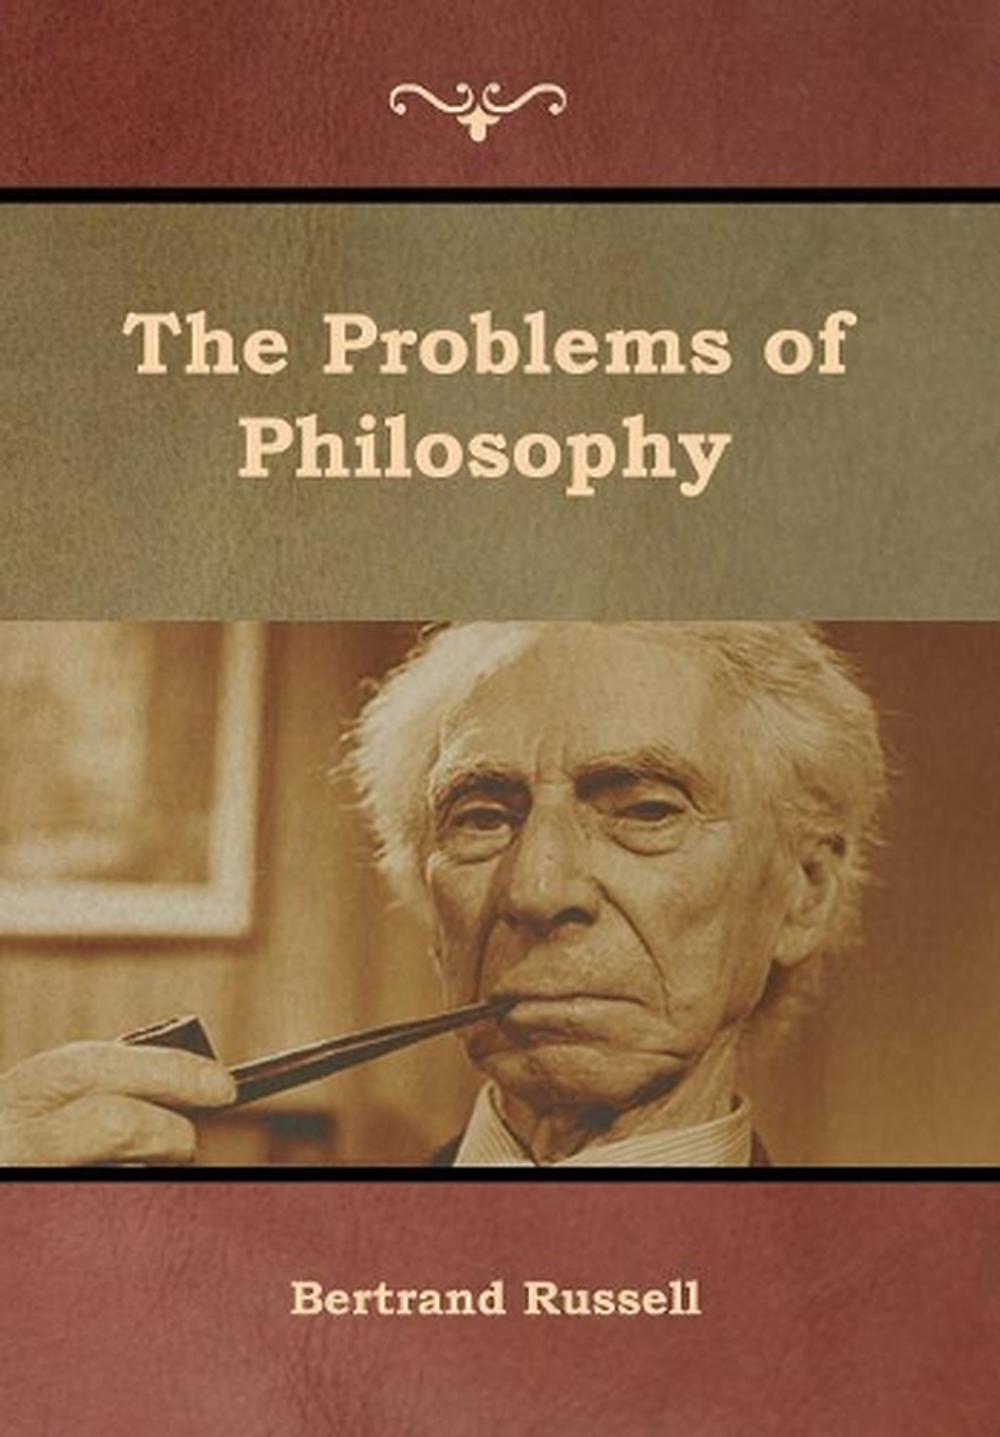 Problems of Philosophy by Bertrand Russell (English) Hardcover Book ...